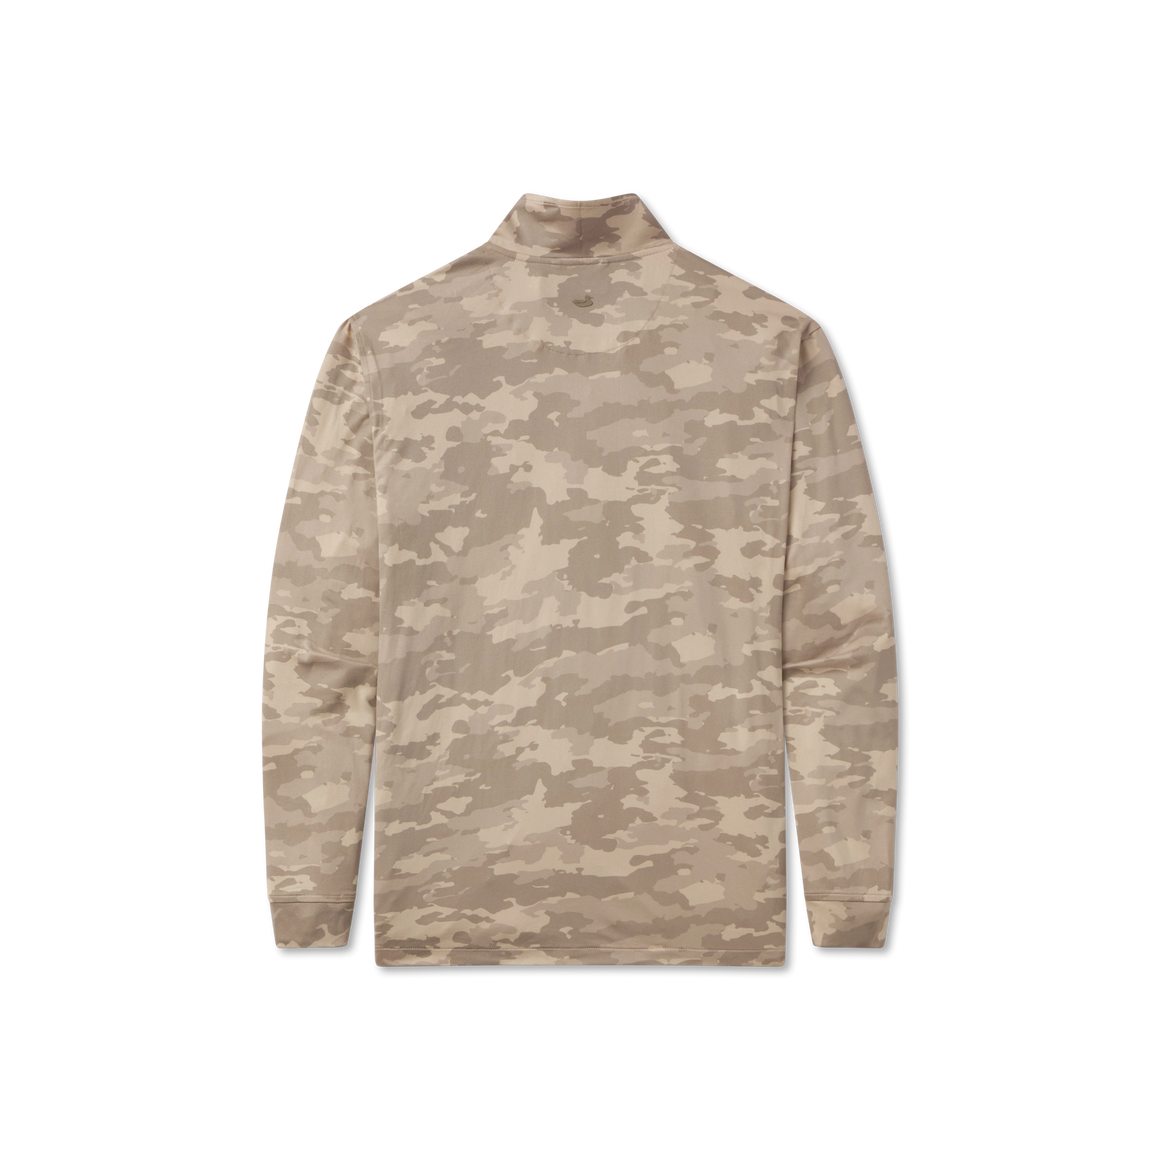 Southern Marsh Mansfield Performance Pullover